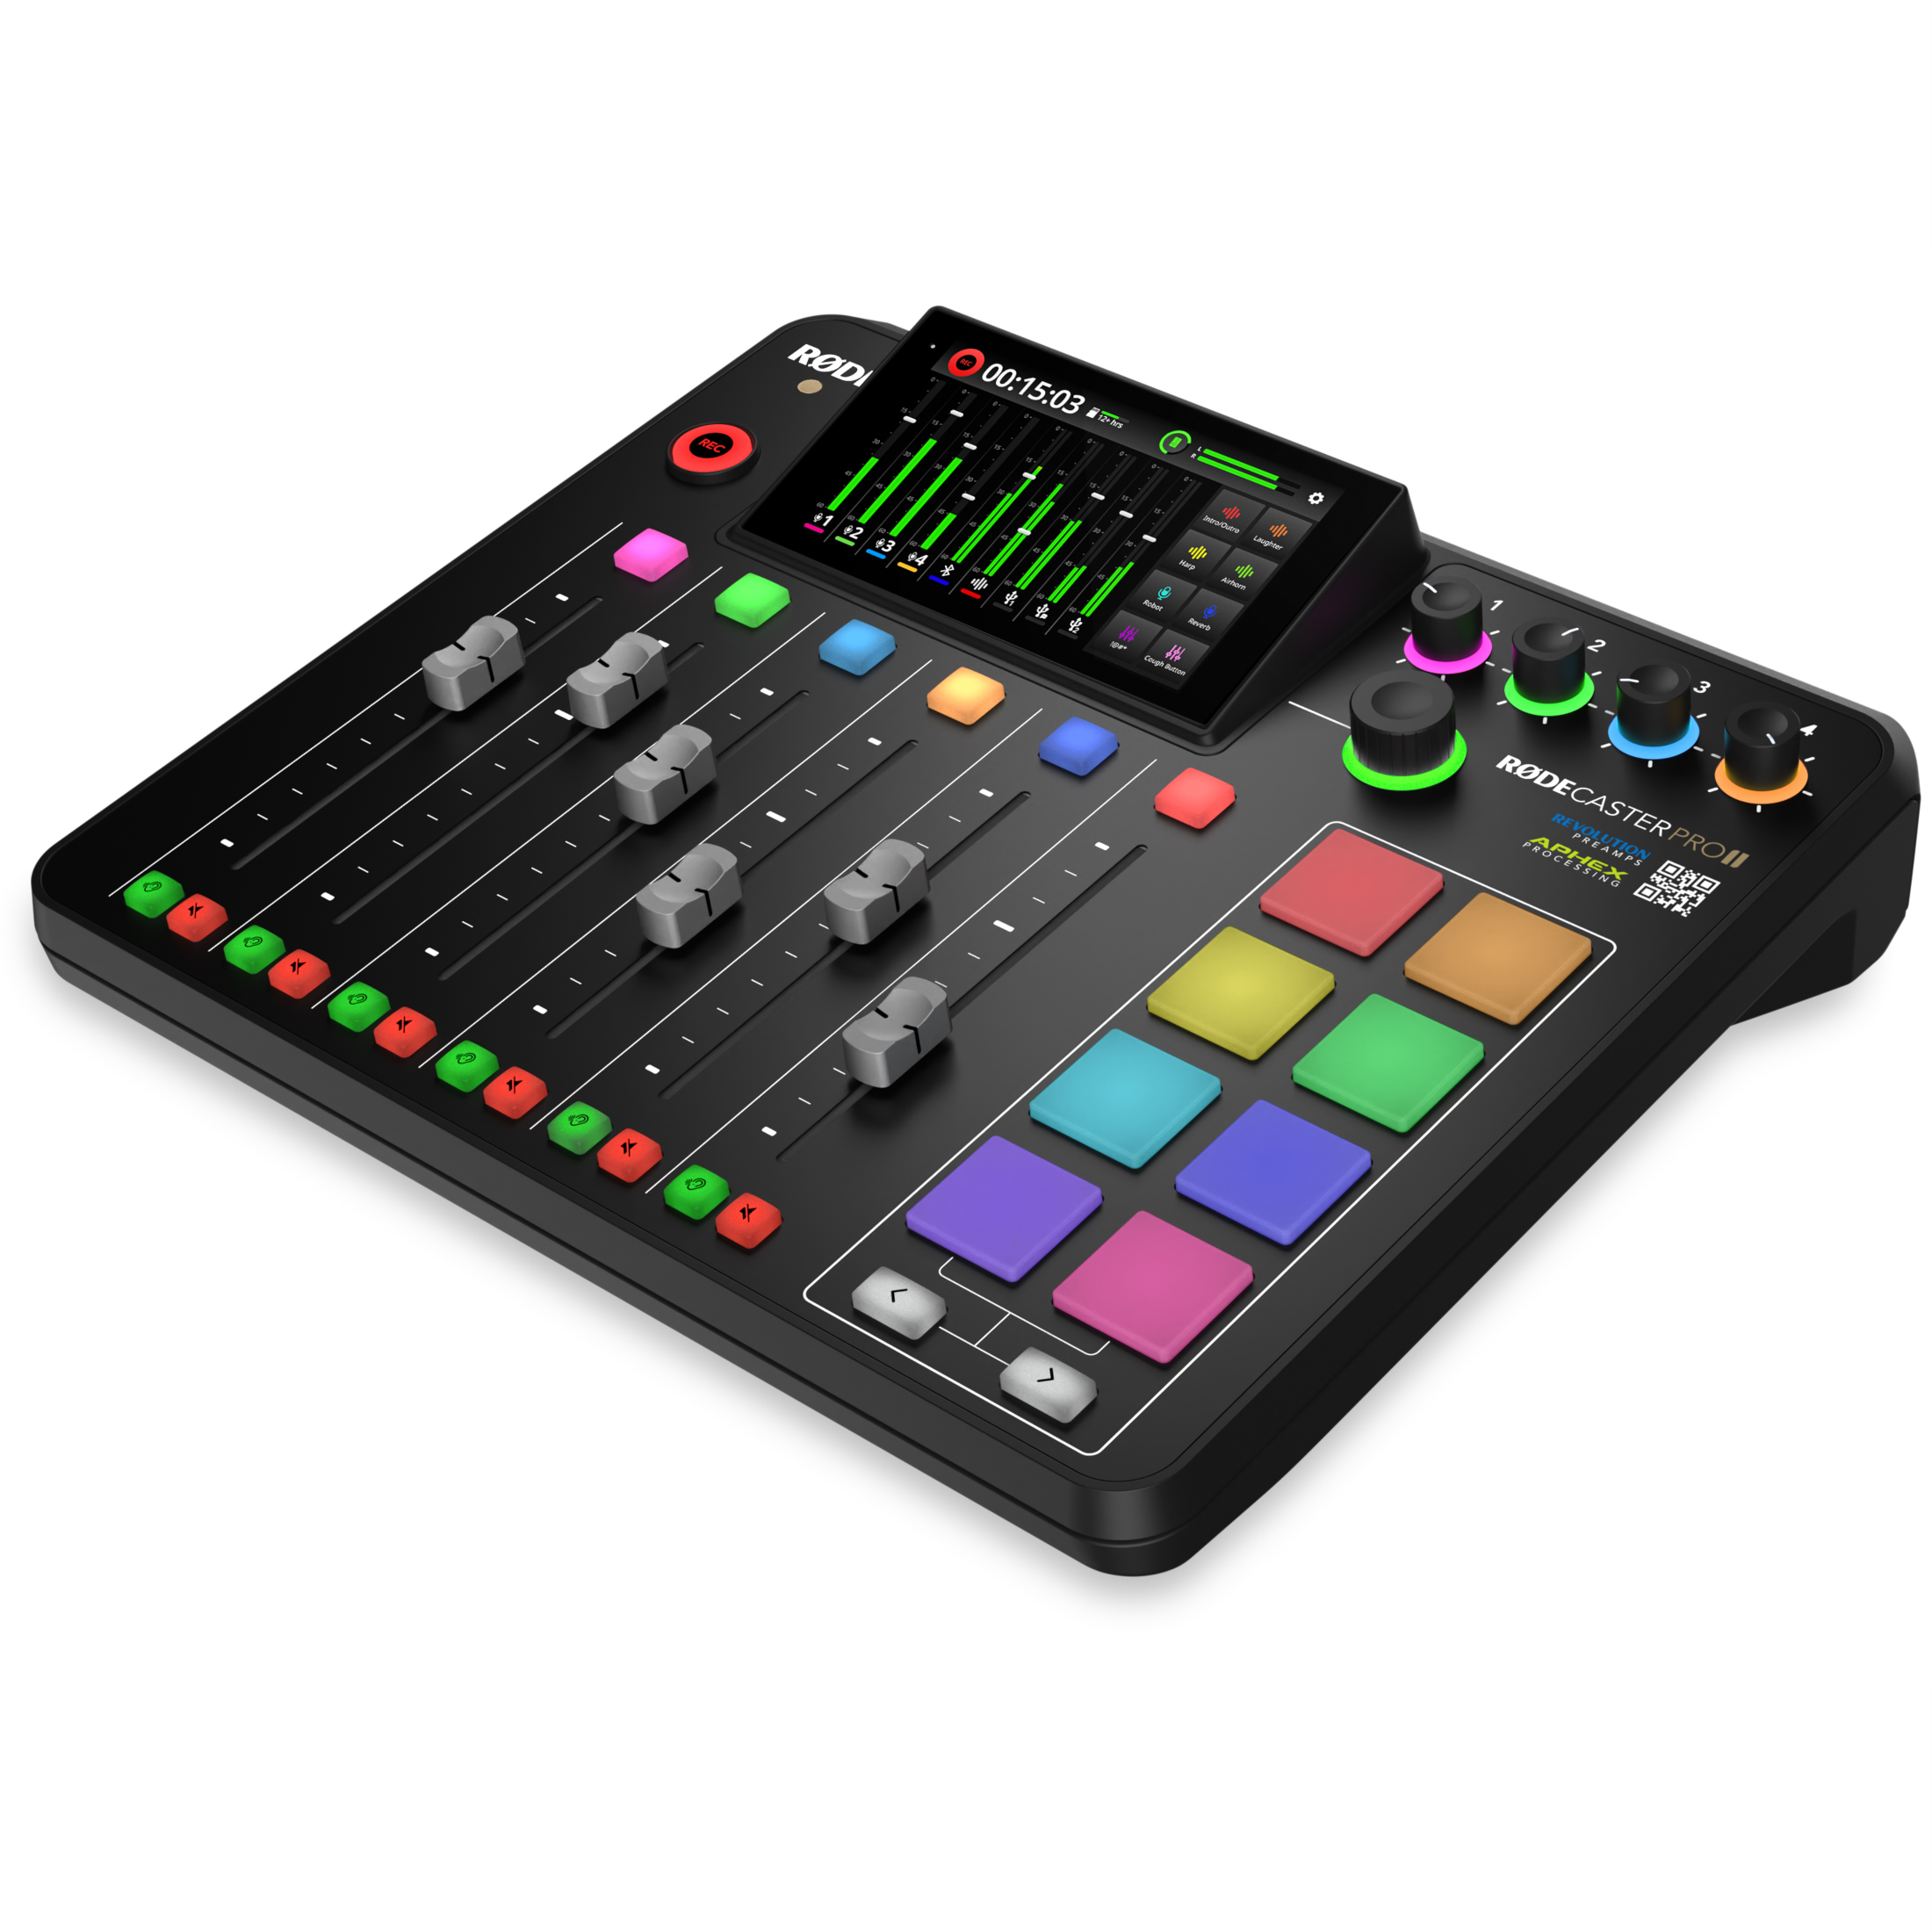 Rode RODECaster Pro II Ultimate Podcast Bundle